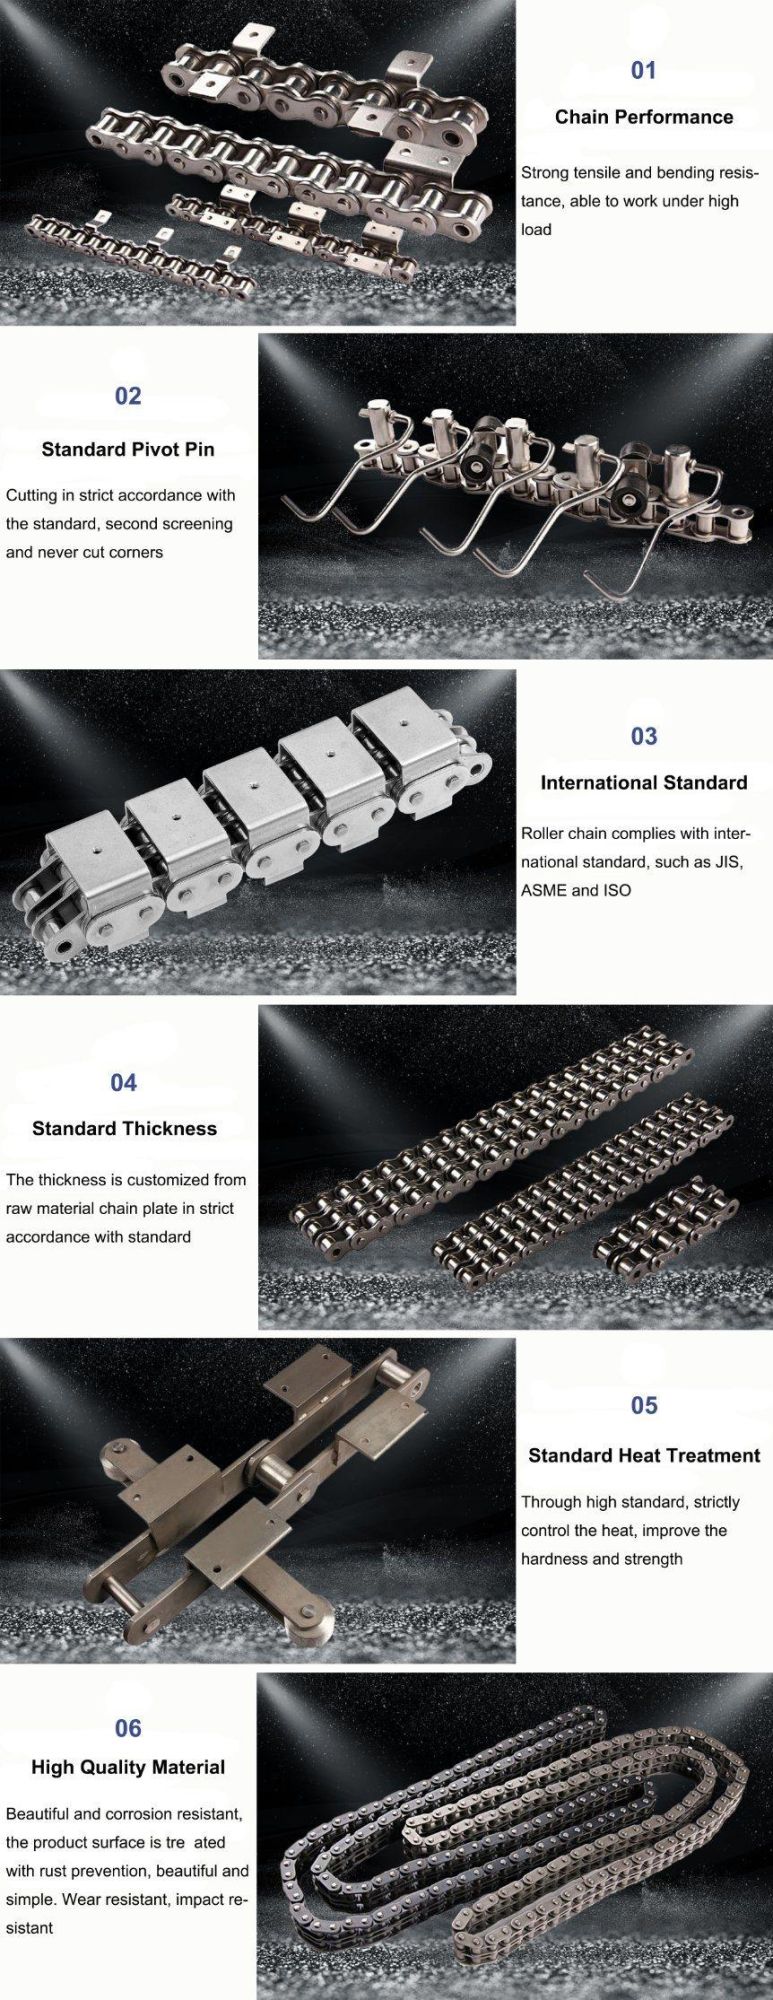 304 Stainless Steel 81X 81xh 81xhe 81xf14 Lumber Conveyor Roller Chain with Attachments